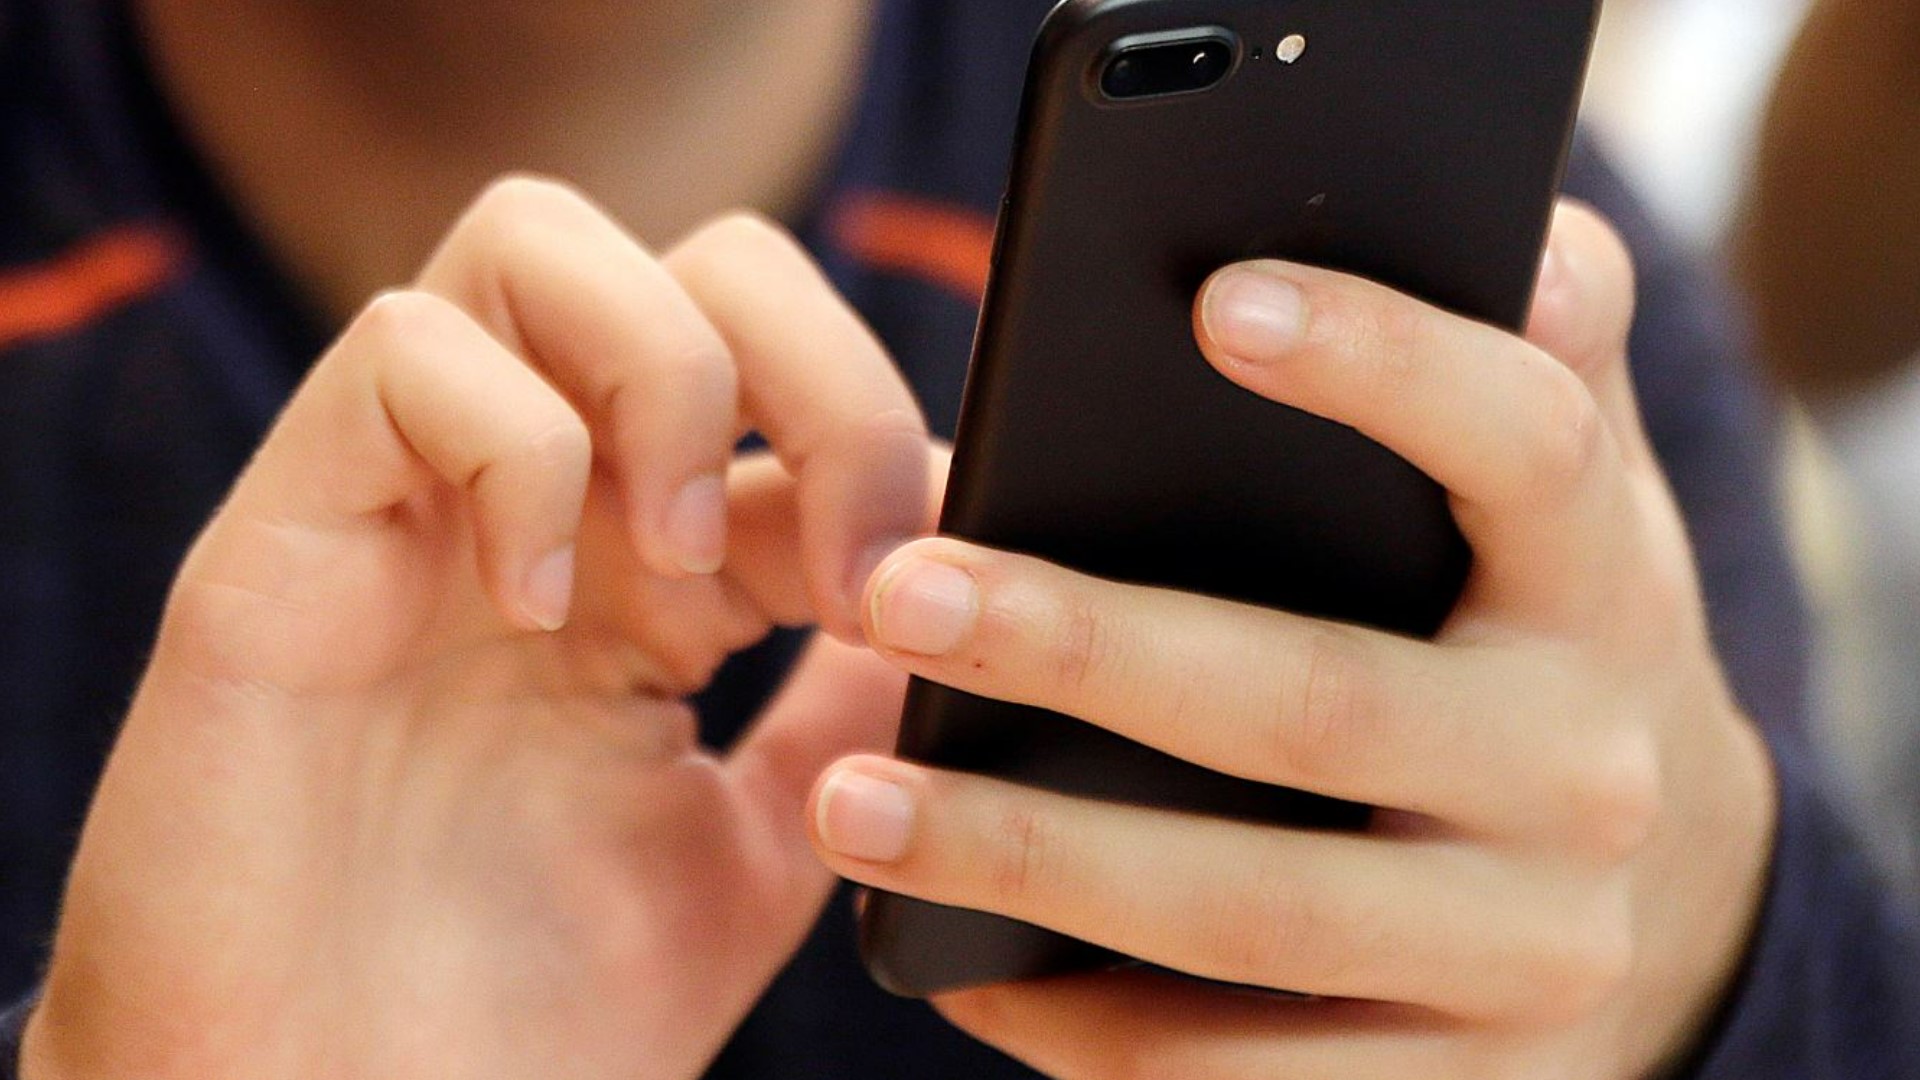 Dublin City Schools, where the roundtable was held, has implemented a cell phone ban in elementary and middle schools this year.